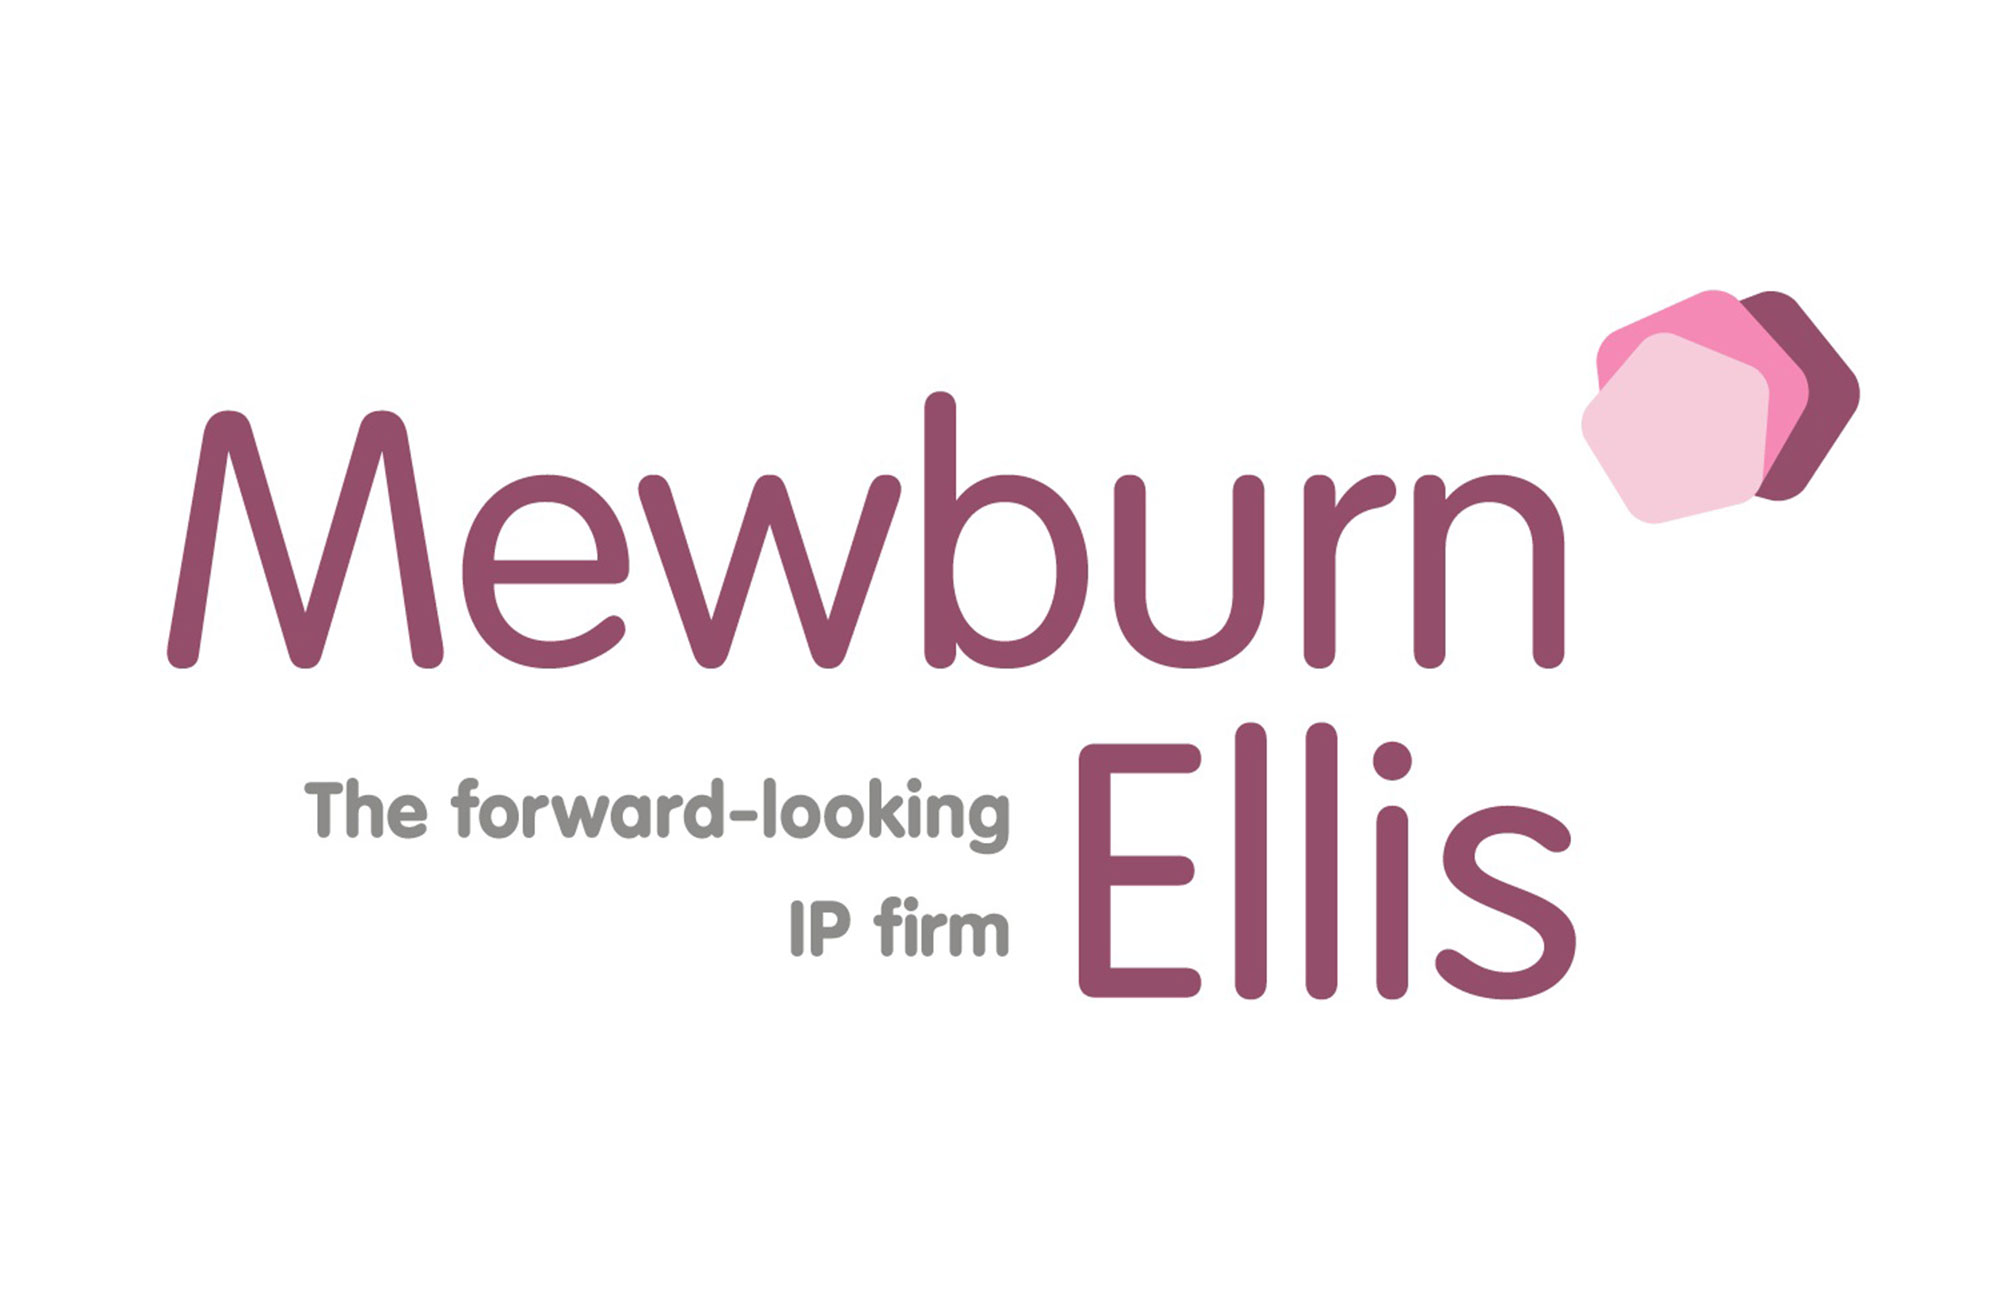 Our new brand: the forward-looking IP firm